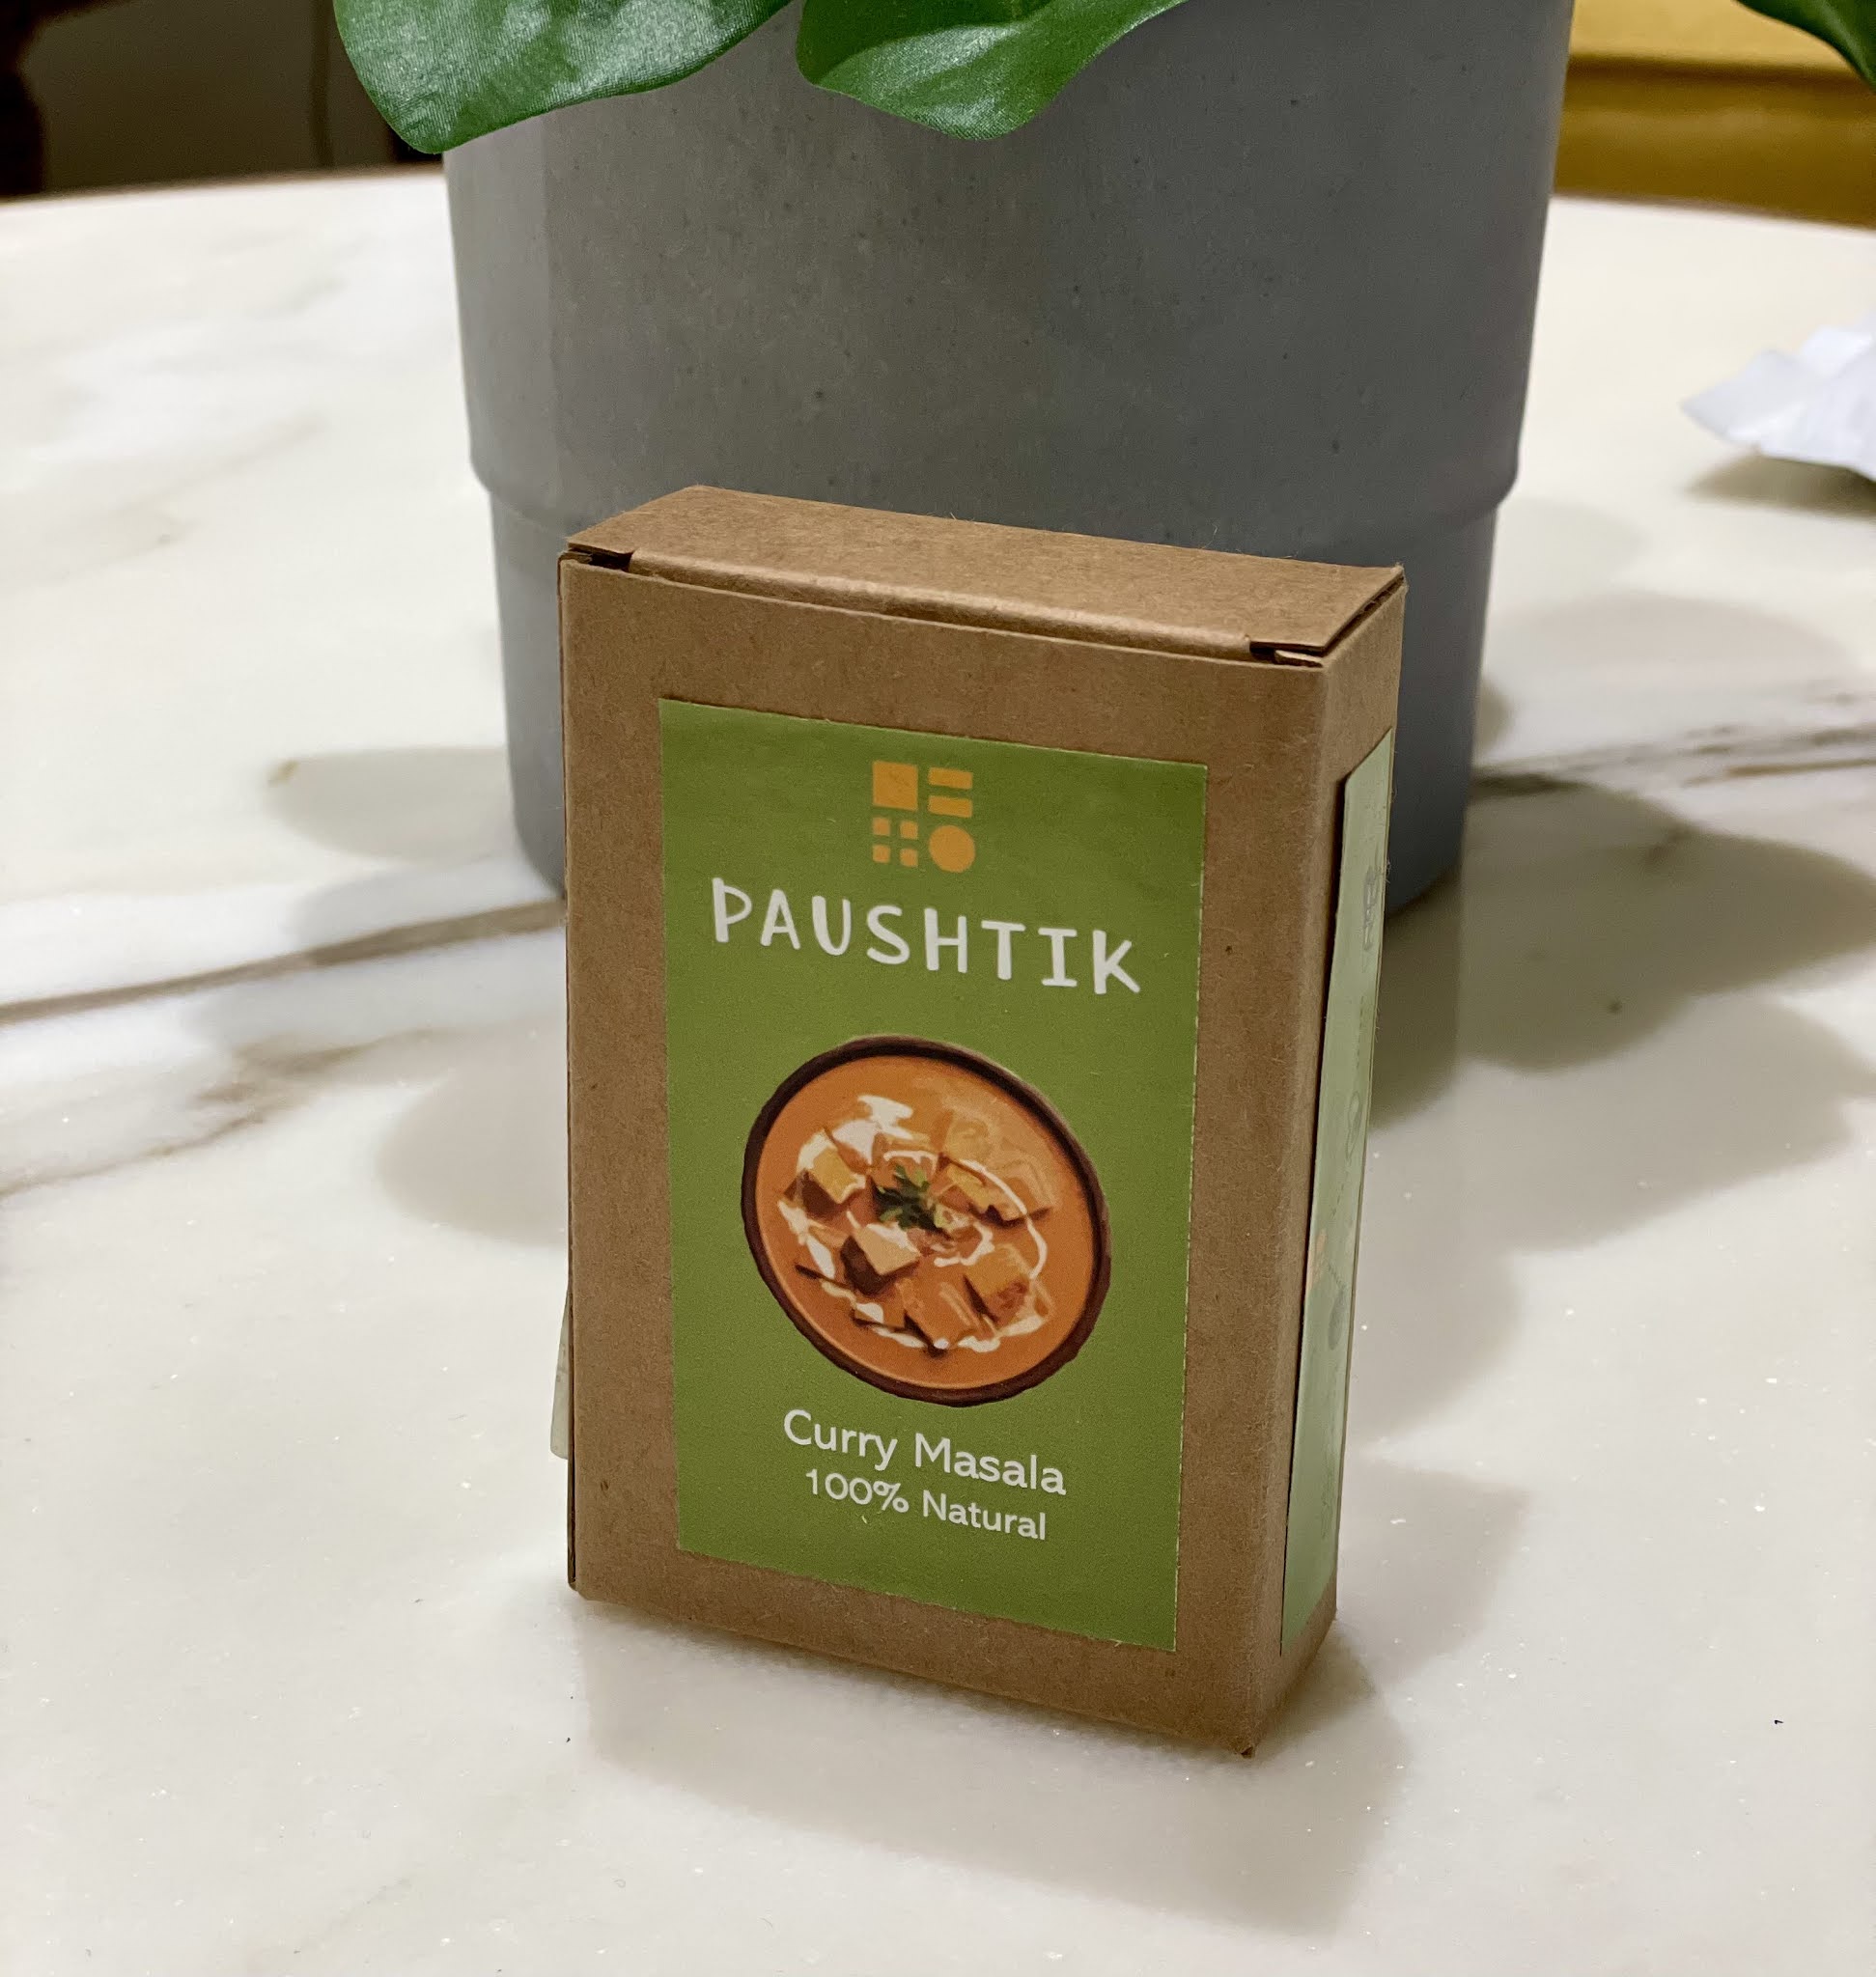 Organic Food Brands in India - Pashtik organic spices - Sustainable Indian Brands